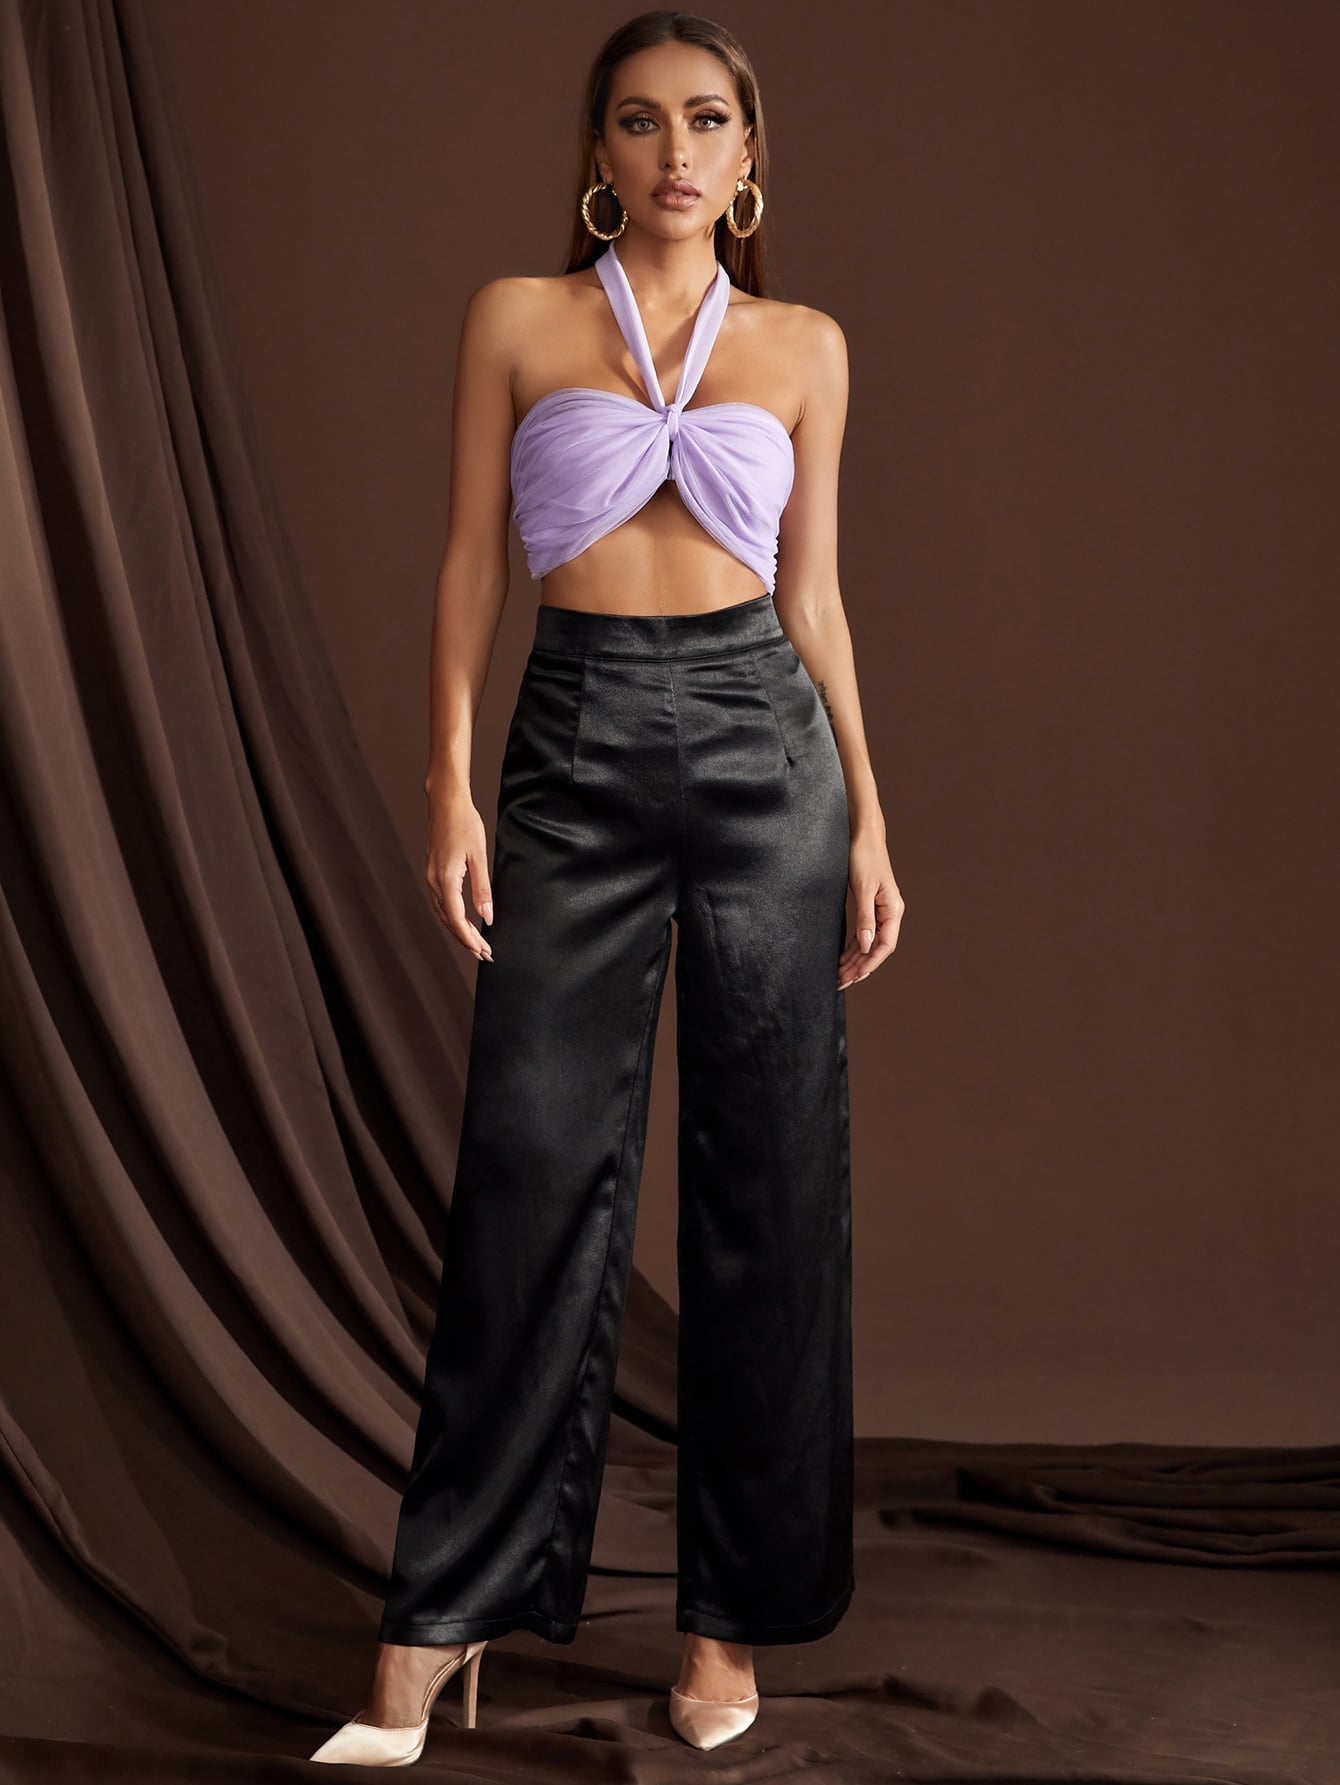 Lilac Purple Backless Sleeveless Ruched Crop Halter Top